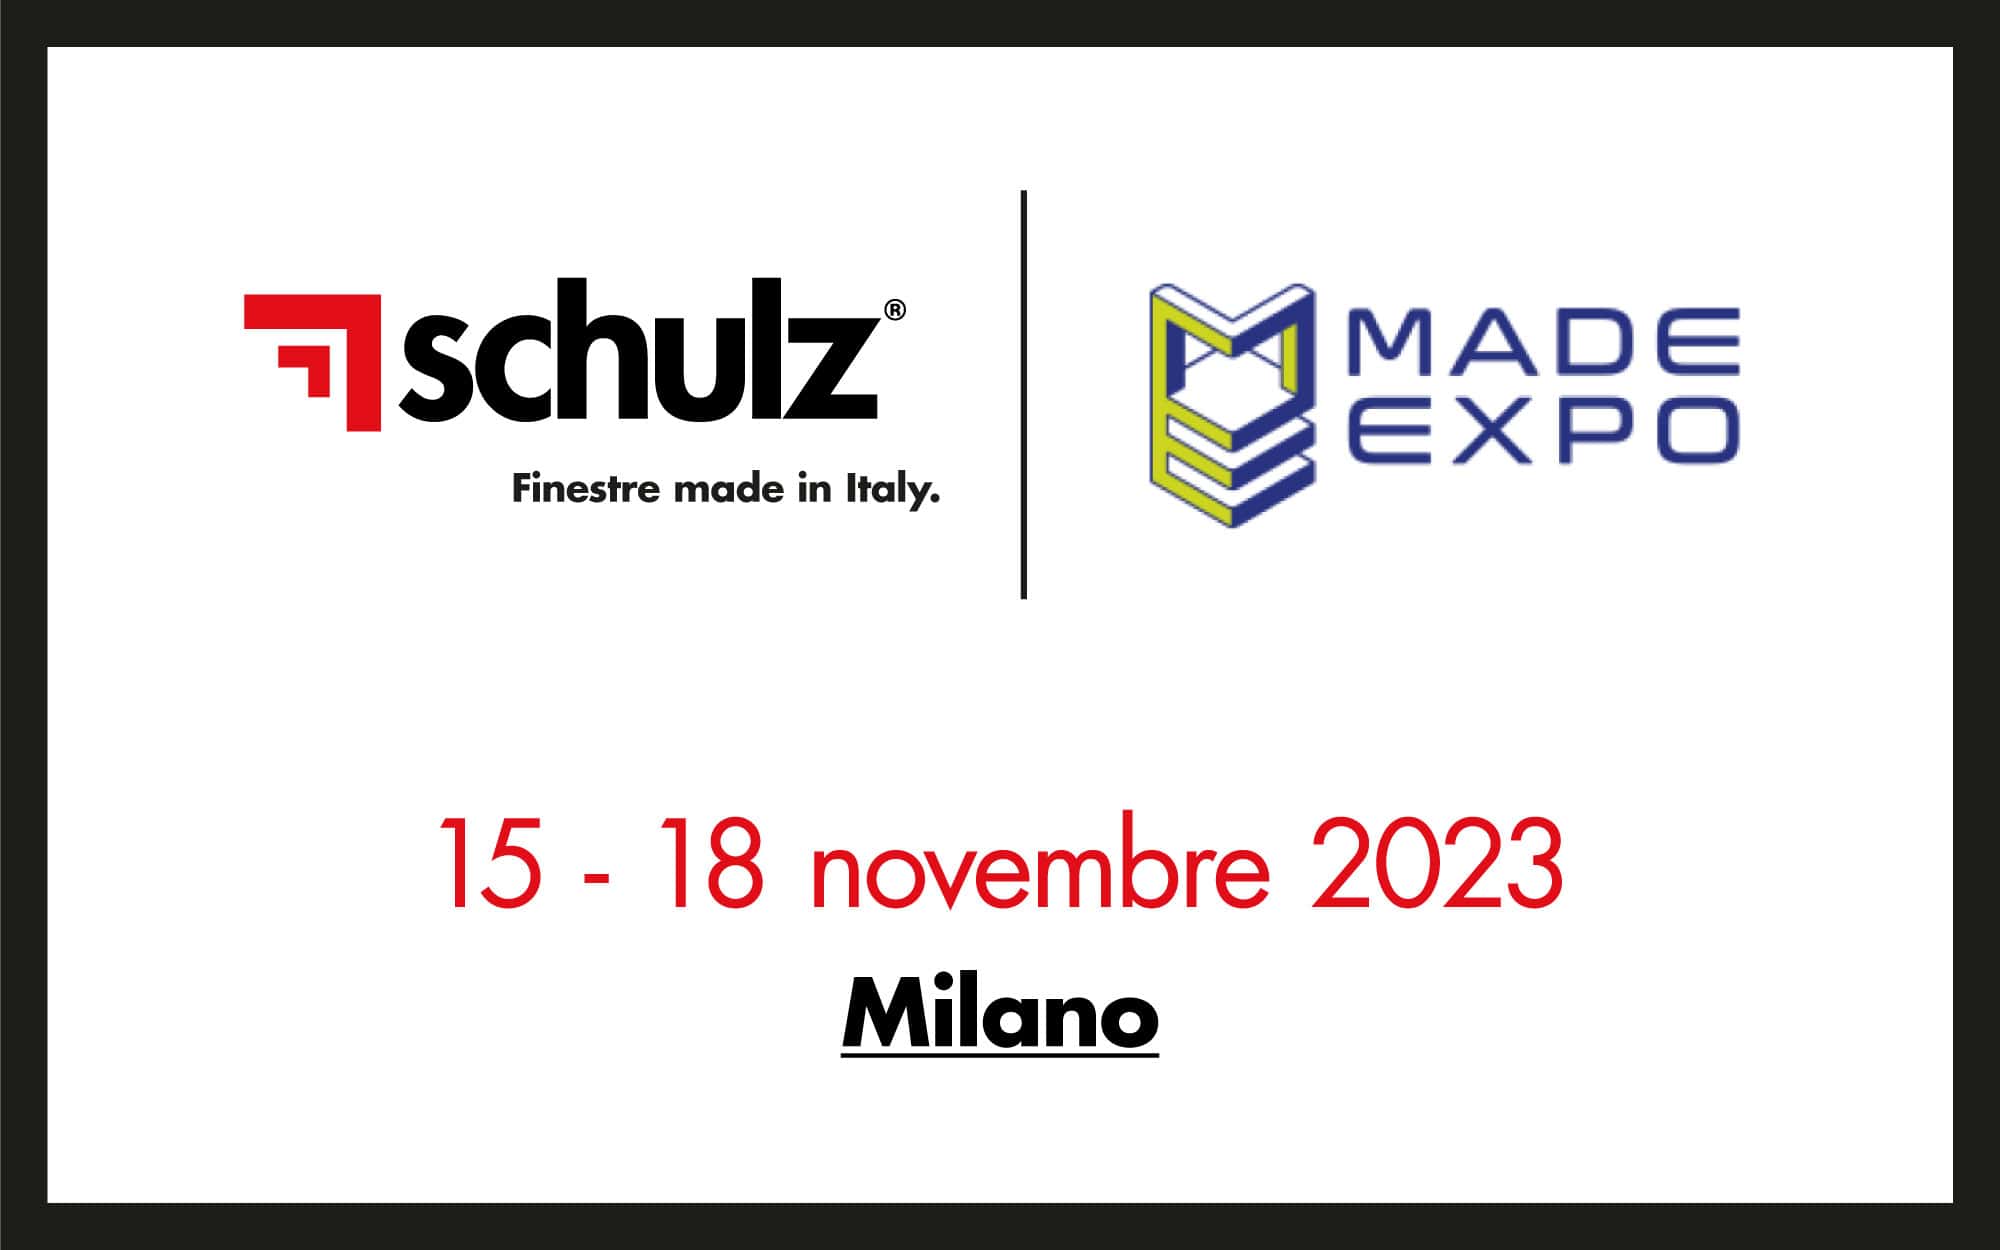 made-expo-2023